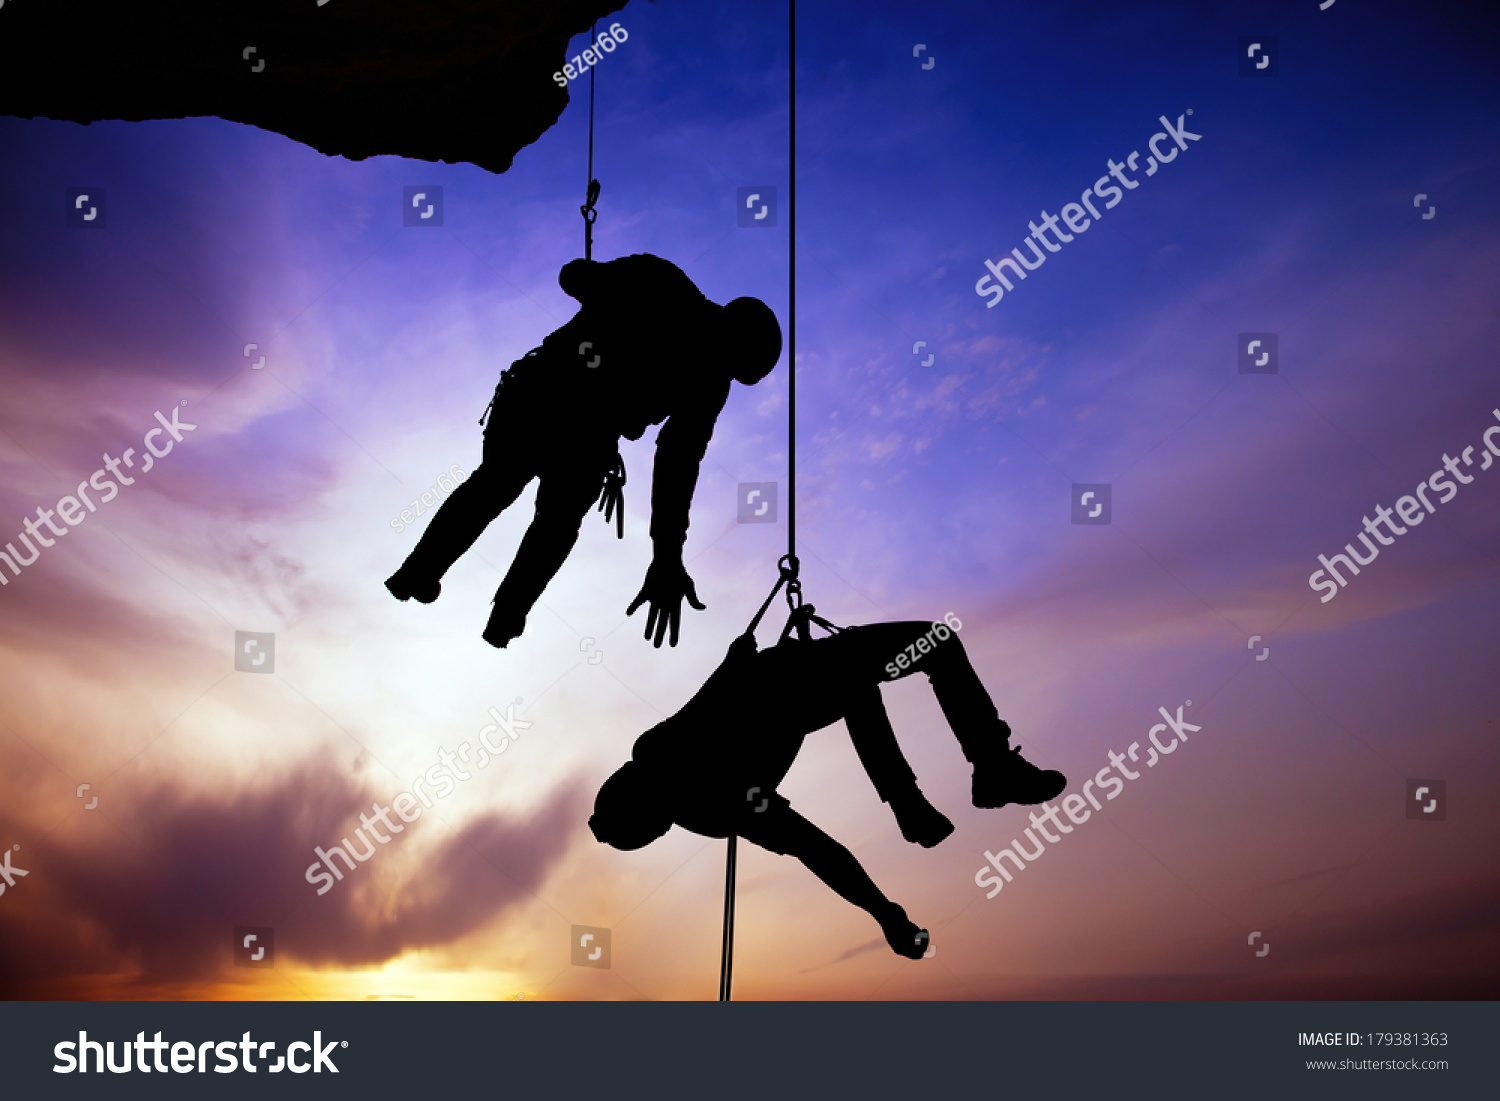 Silhouette Helping Hand Between Two Climber Stock Photo Shutterstock